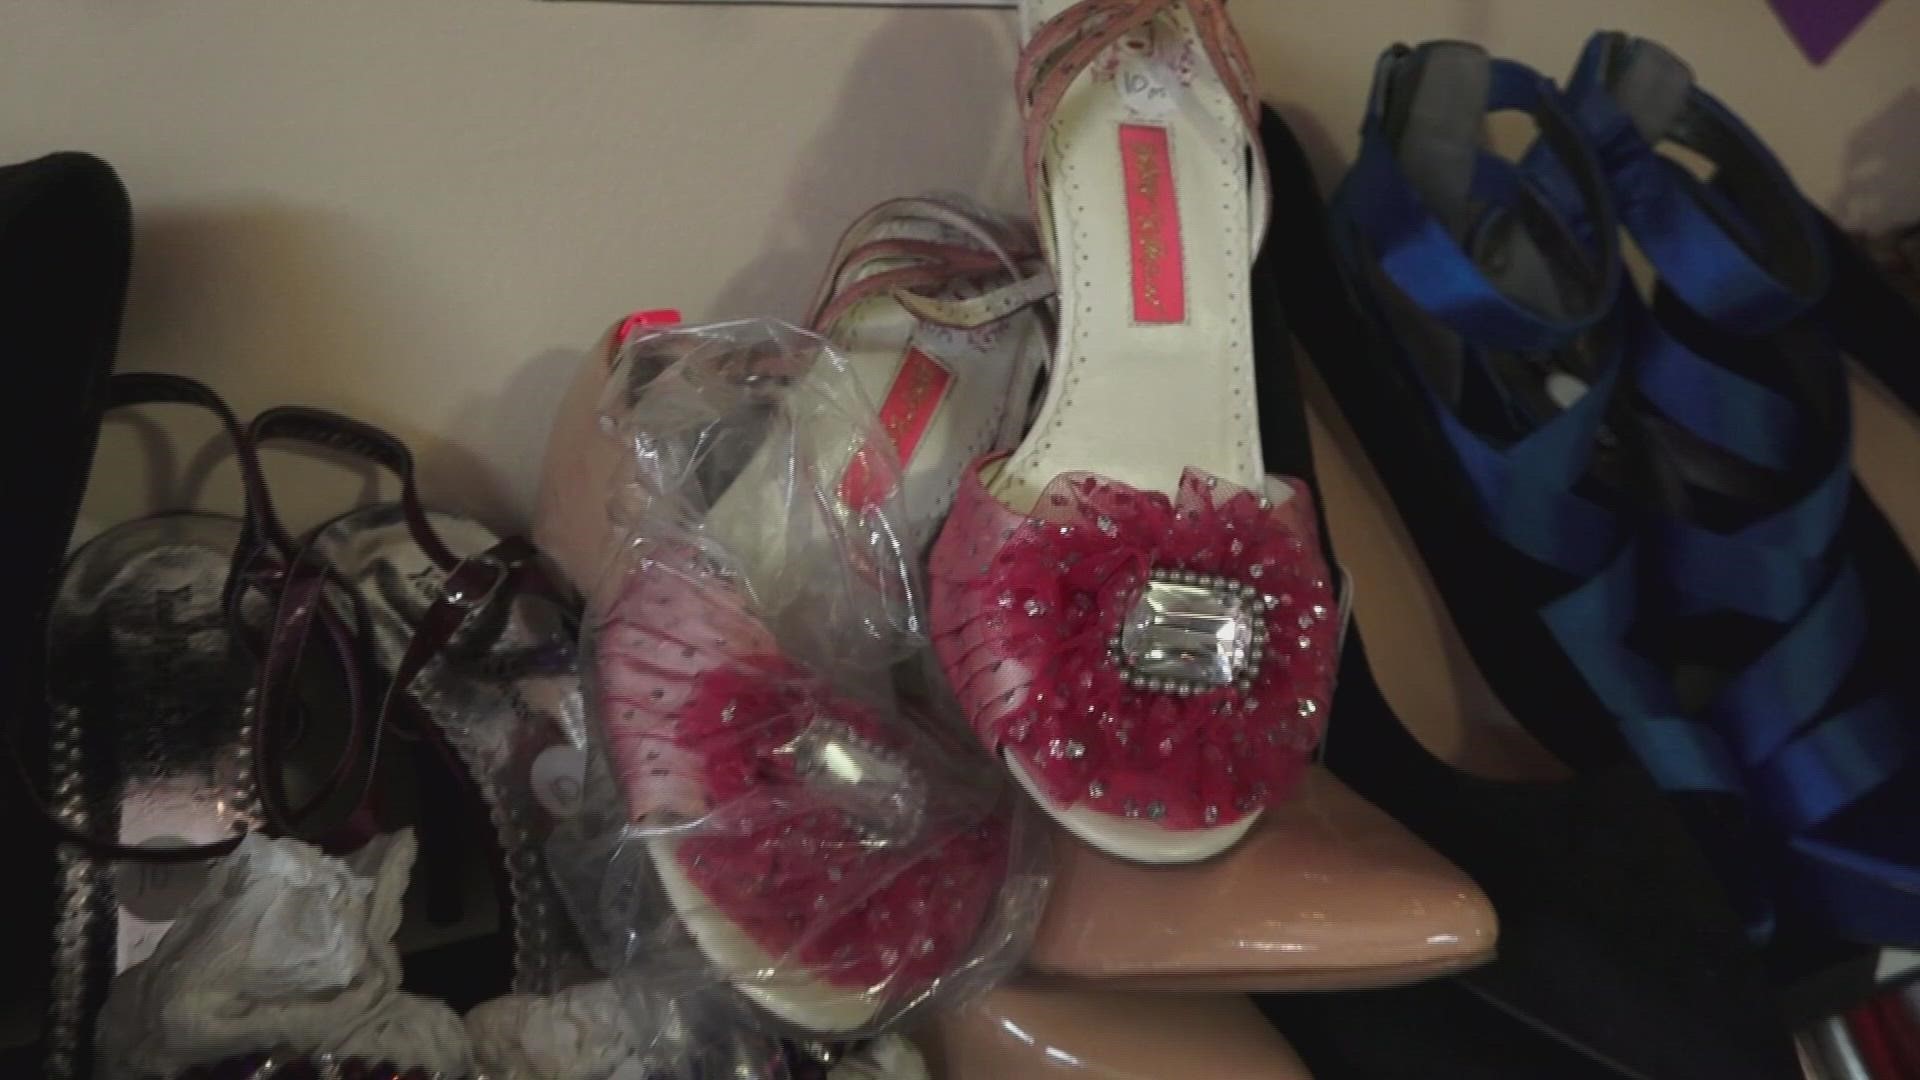 In Jefferson County, a nonprofit is preparing for prom season. "Cinderella's Closet" gives girls the chance to take home a dress for the big dance free of charge!